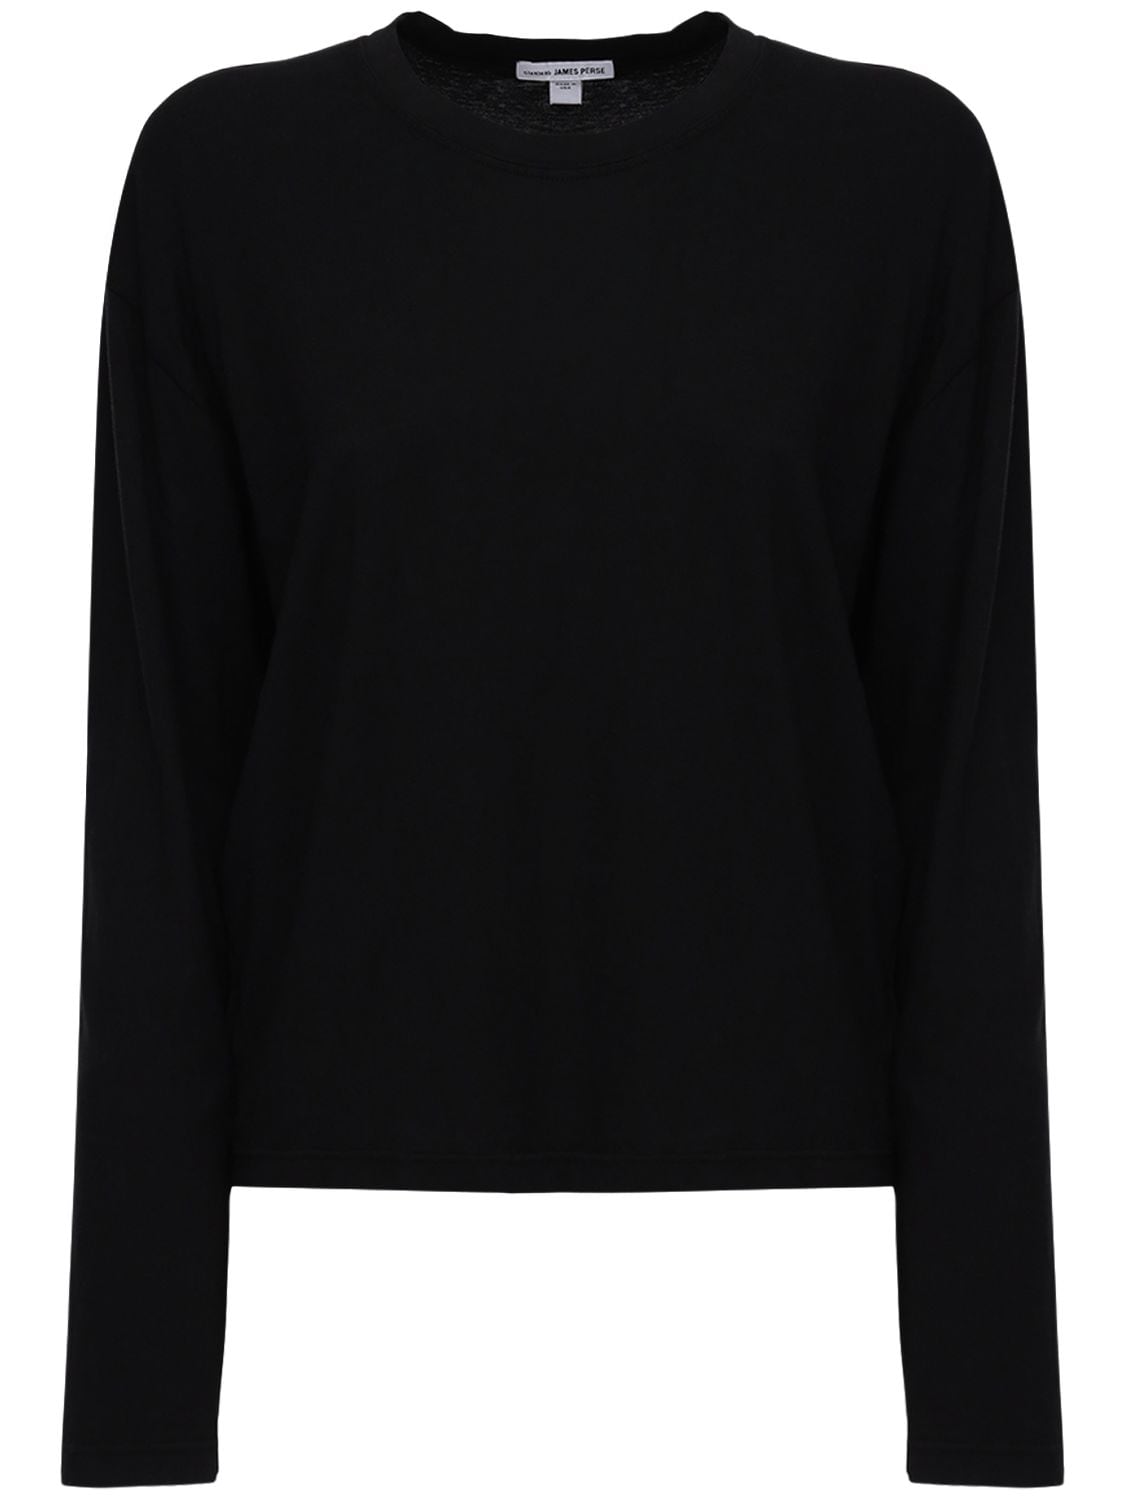 James Perse Boxy Light Cotton Jersey T-shirt In Black